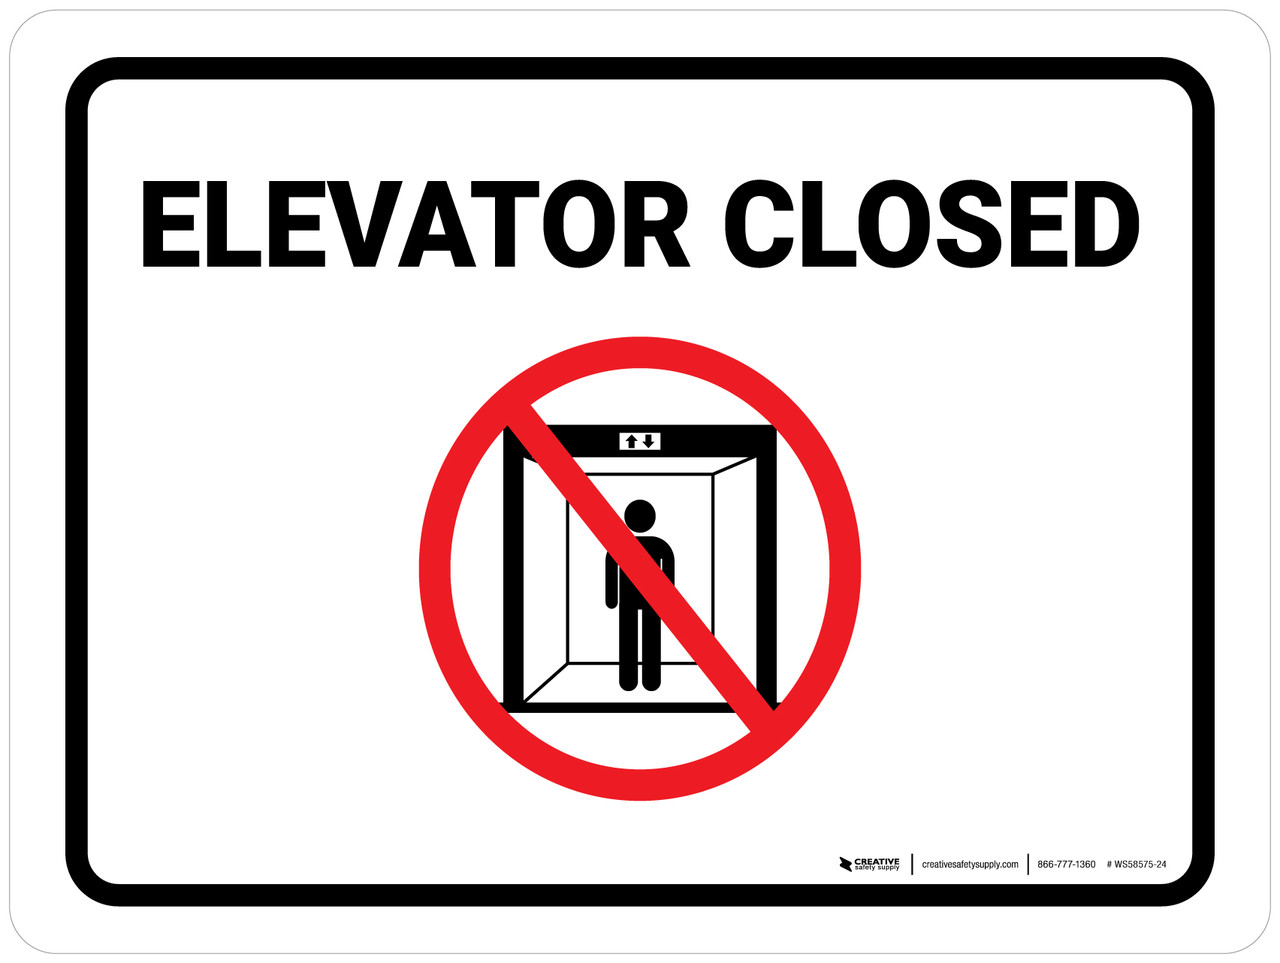 Out Of Order Signs (5 Free PDF Printables)